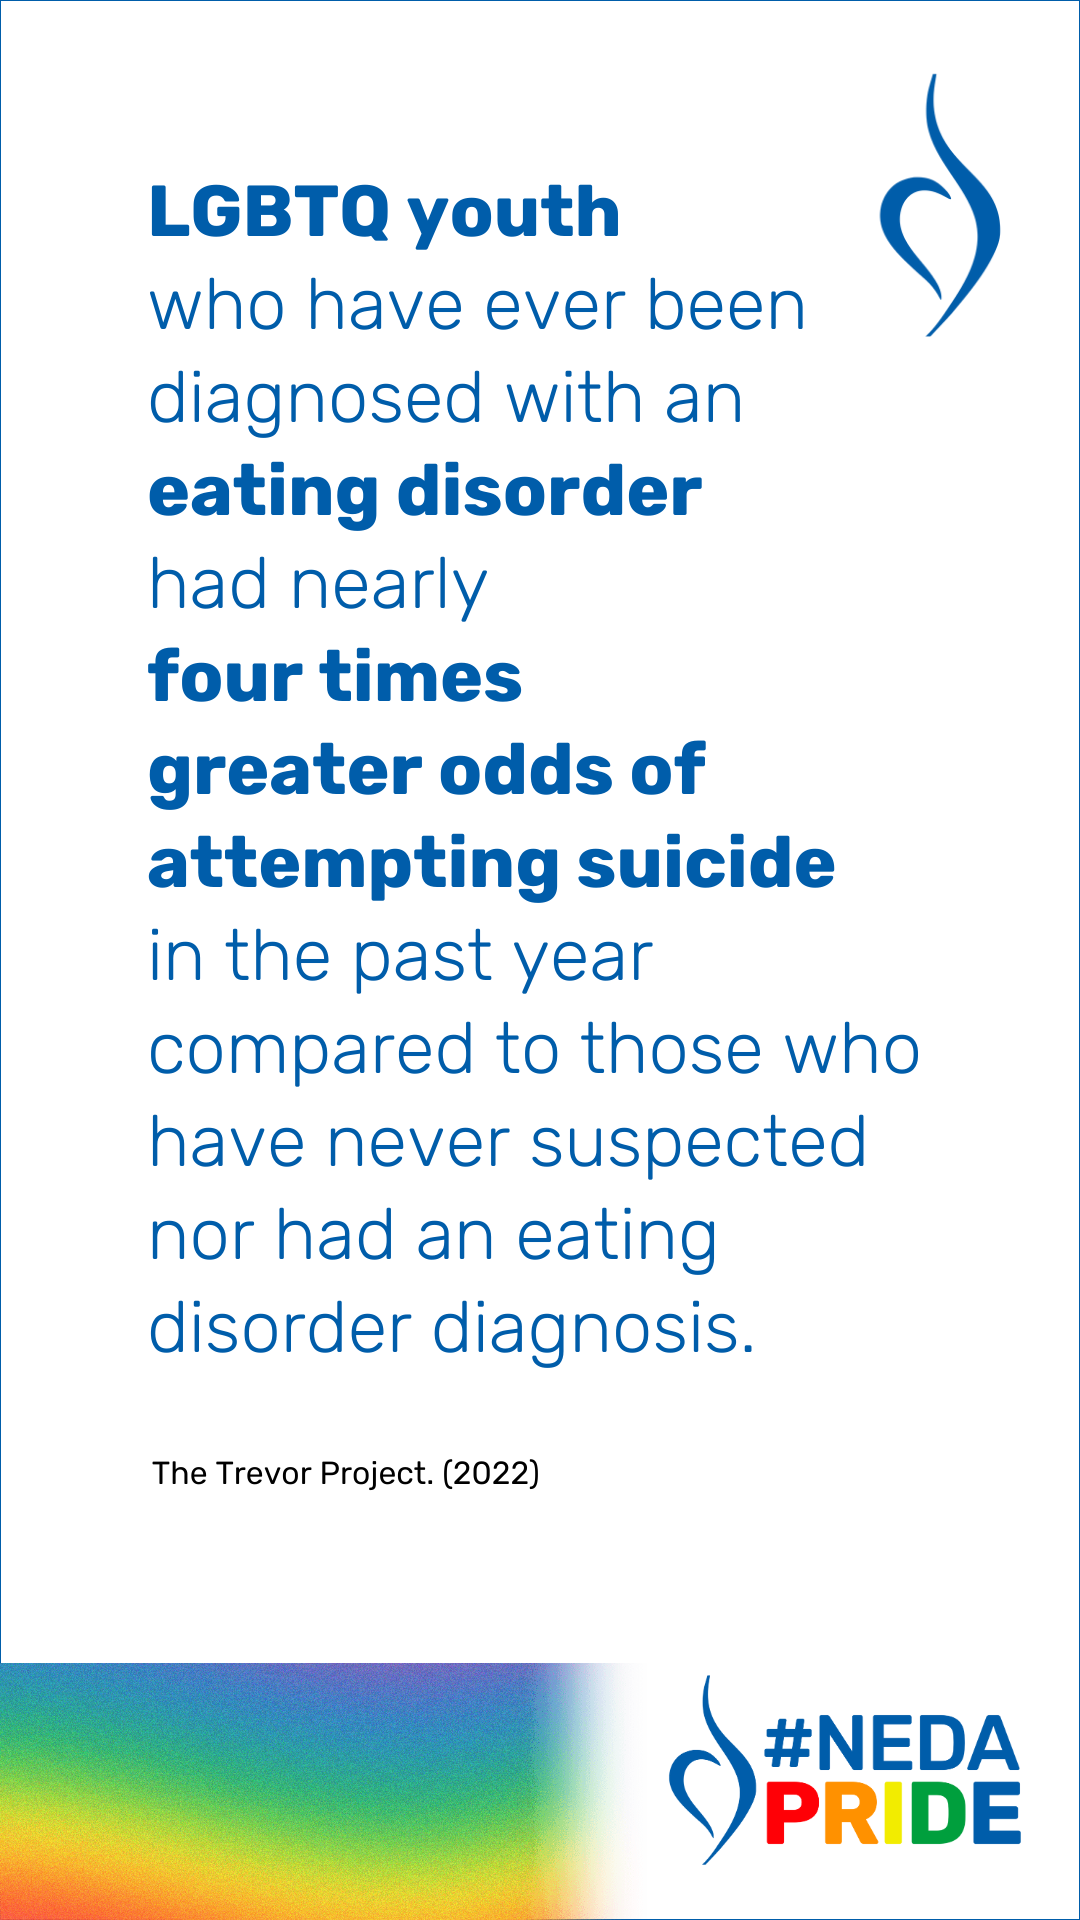 lgbtq youth who have ever been diagnosed with an eating disorder had nearly four times greater odds of attempting suicide please click to download